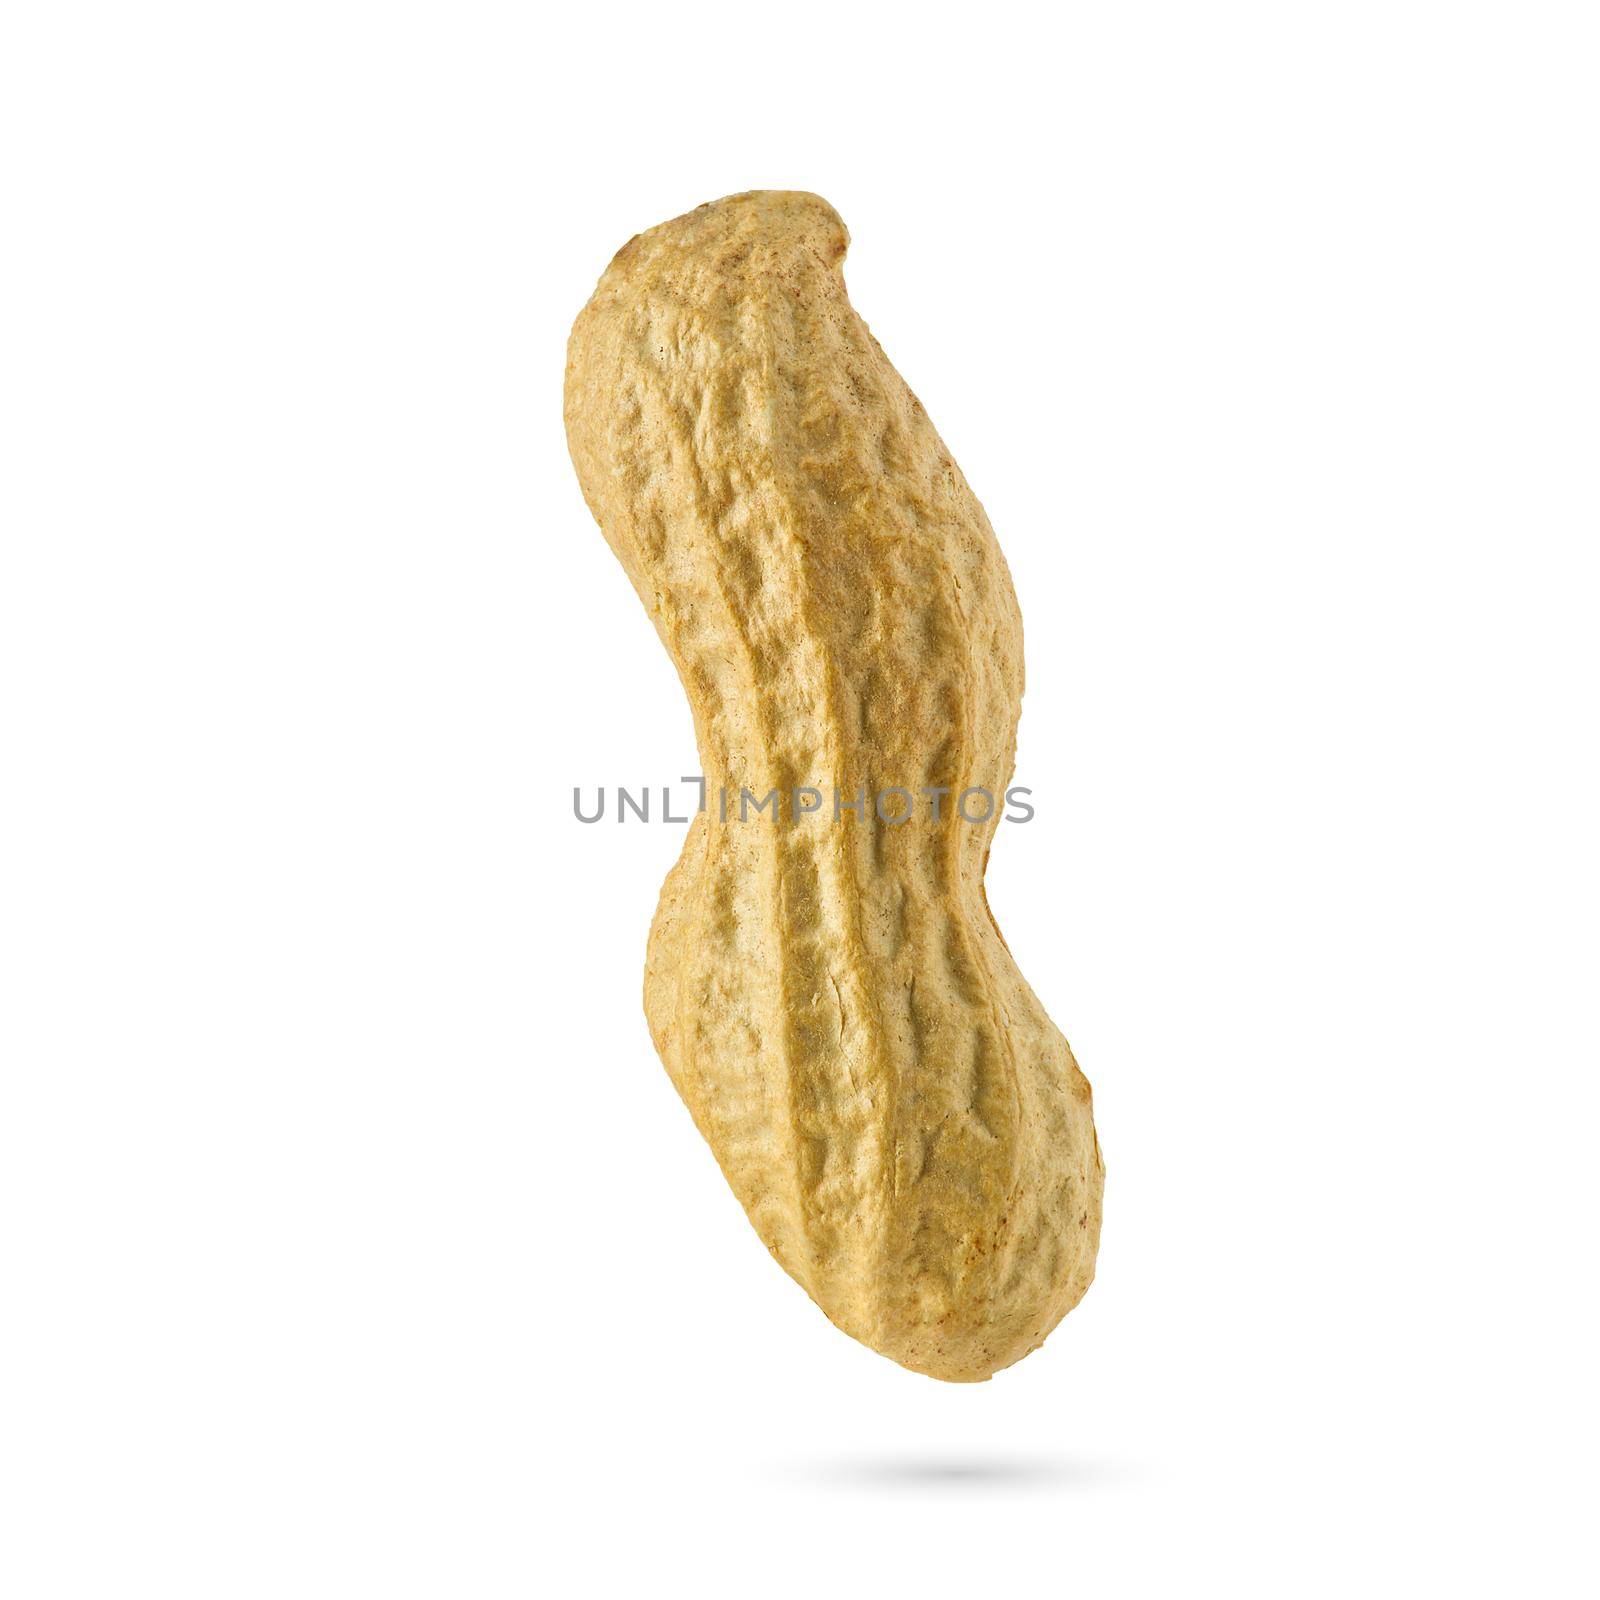 Peanuts isolated on white background. with shadow. can be used as design element